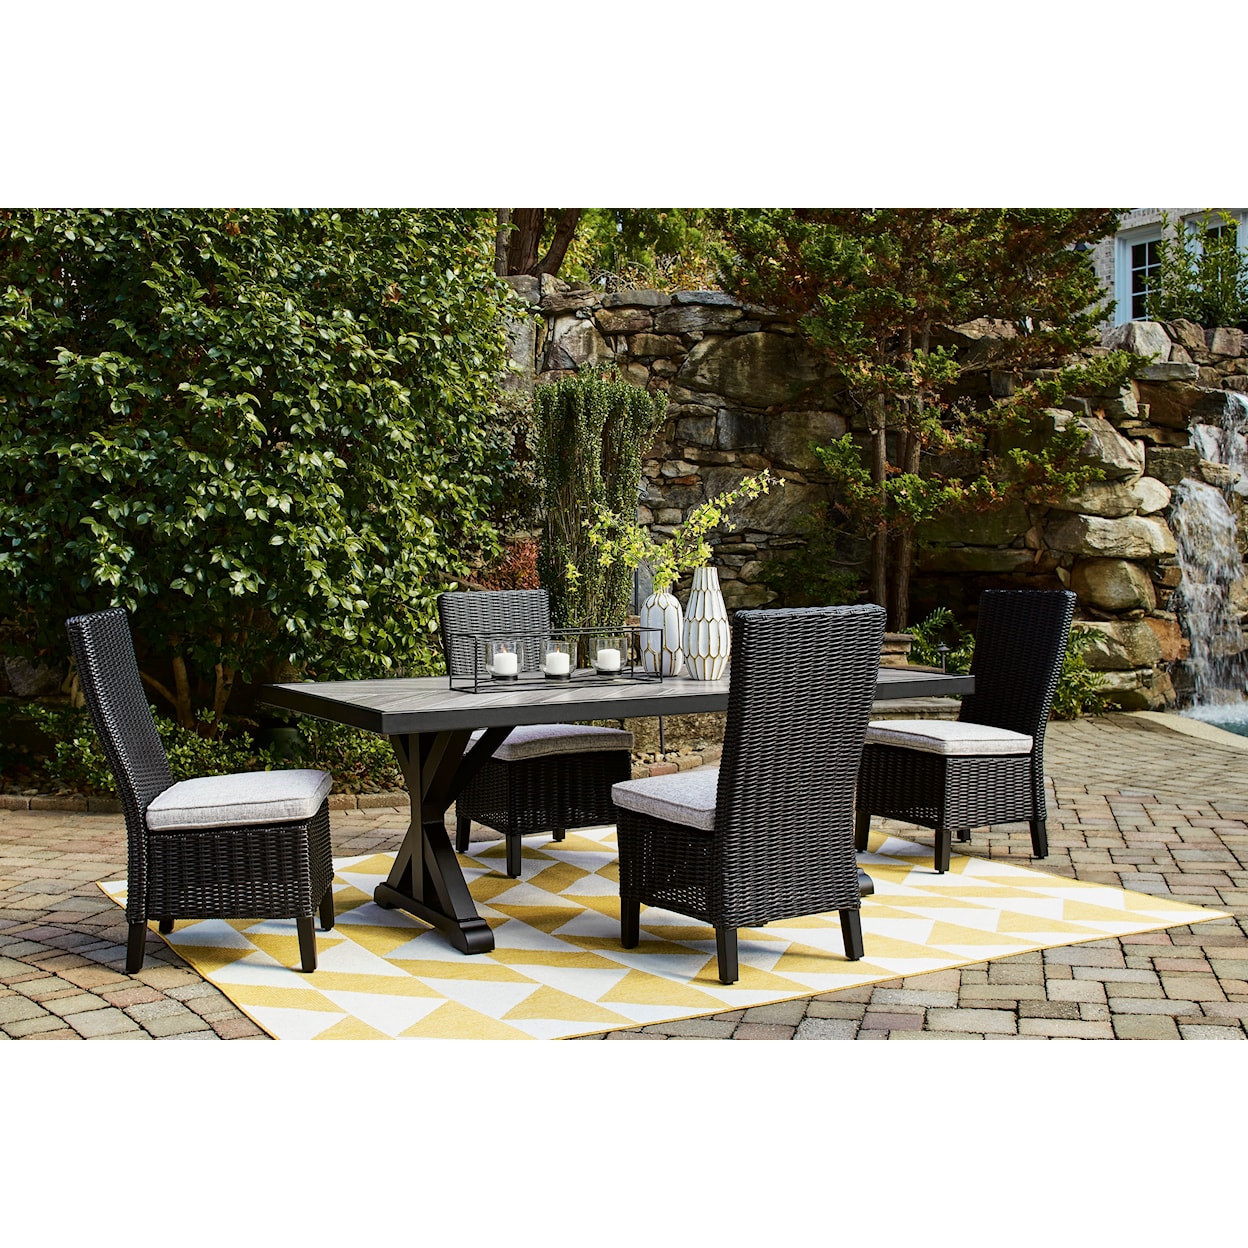 Signature Design by Ashley Beachcroft 5 Piece Outdoor Dining Set